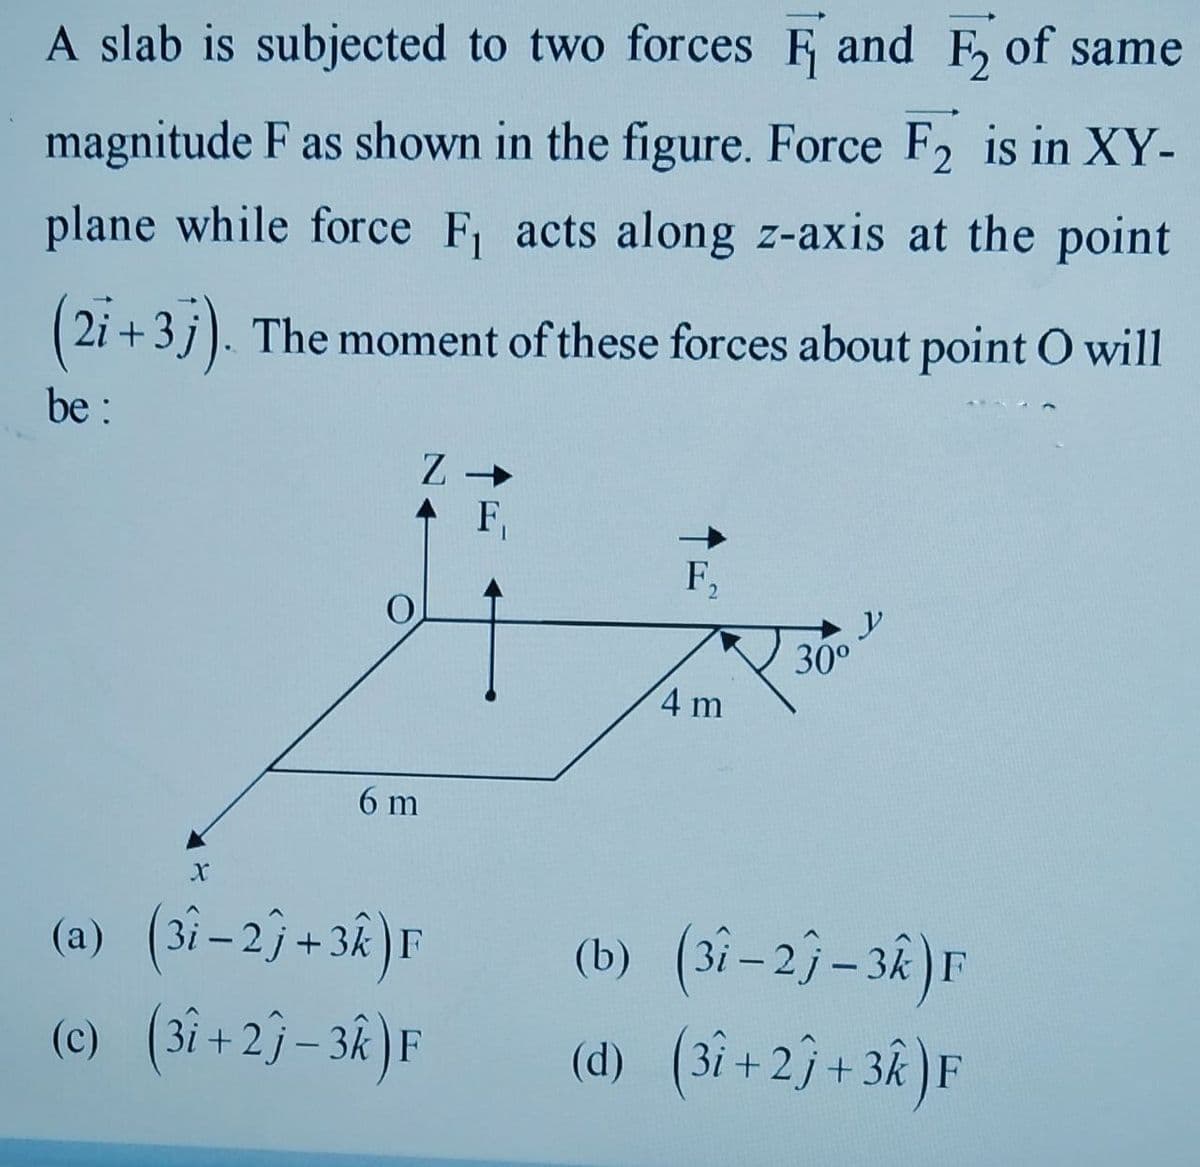 A slab is subjected to two forces F and F, of same
magnitude F as shown in the figure. Force F2 is in XY-
plane while force F, acts along z-axis at the point
2i +3 j). The moment of these forces about point O will
be :
F,
F,
2.
y
30°
4 m
6 m
(a) (3i - 2j+ 38 )F
(b) (3i–2}–3k)F
(d) (3i + 23+ 3k )F
(c) (3i+2}- 3k )F
